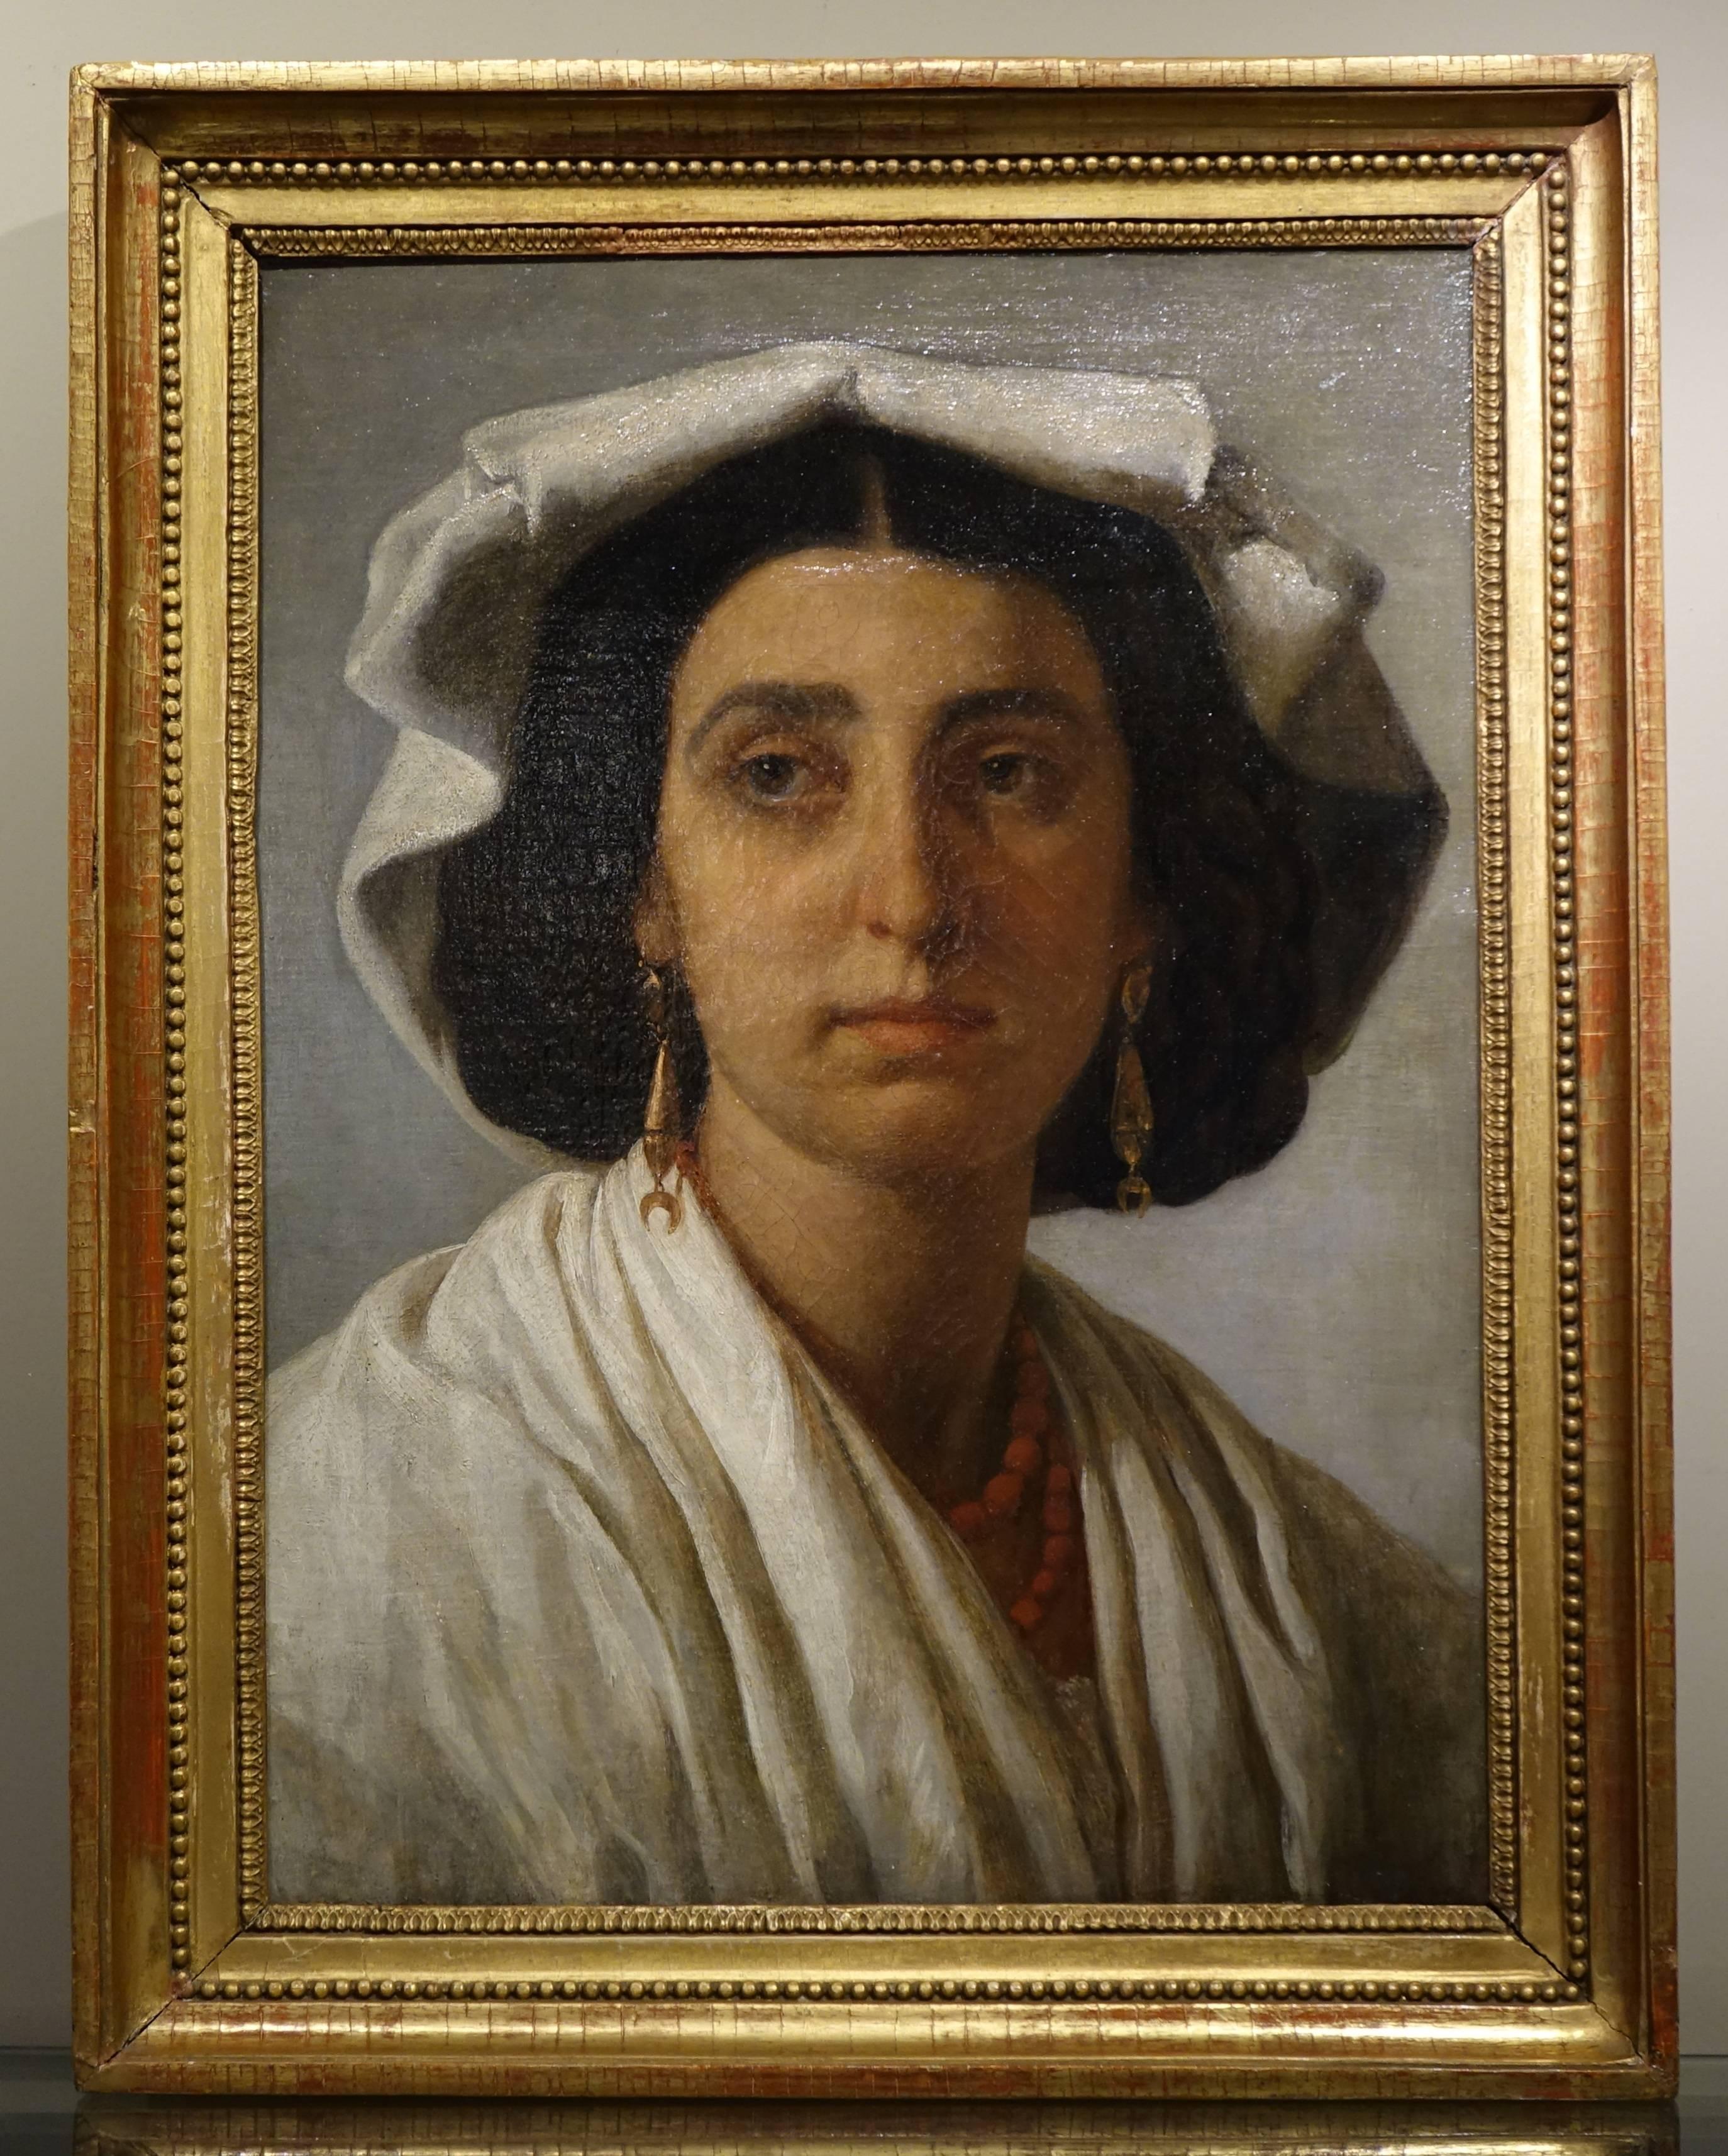 Portrait of a Roman woman attributed to J.V Schnetz (1787-1870).
Jean-Victor Schnetz (April 14, 1787 in Versailles – March 15, 1870 in Paris) was a French academic painter well regarded for his historical and genre paintings.
Schnetz studied in